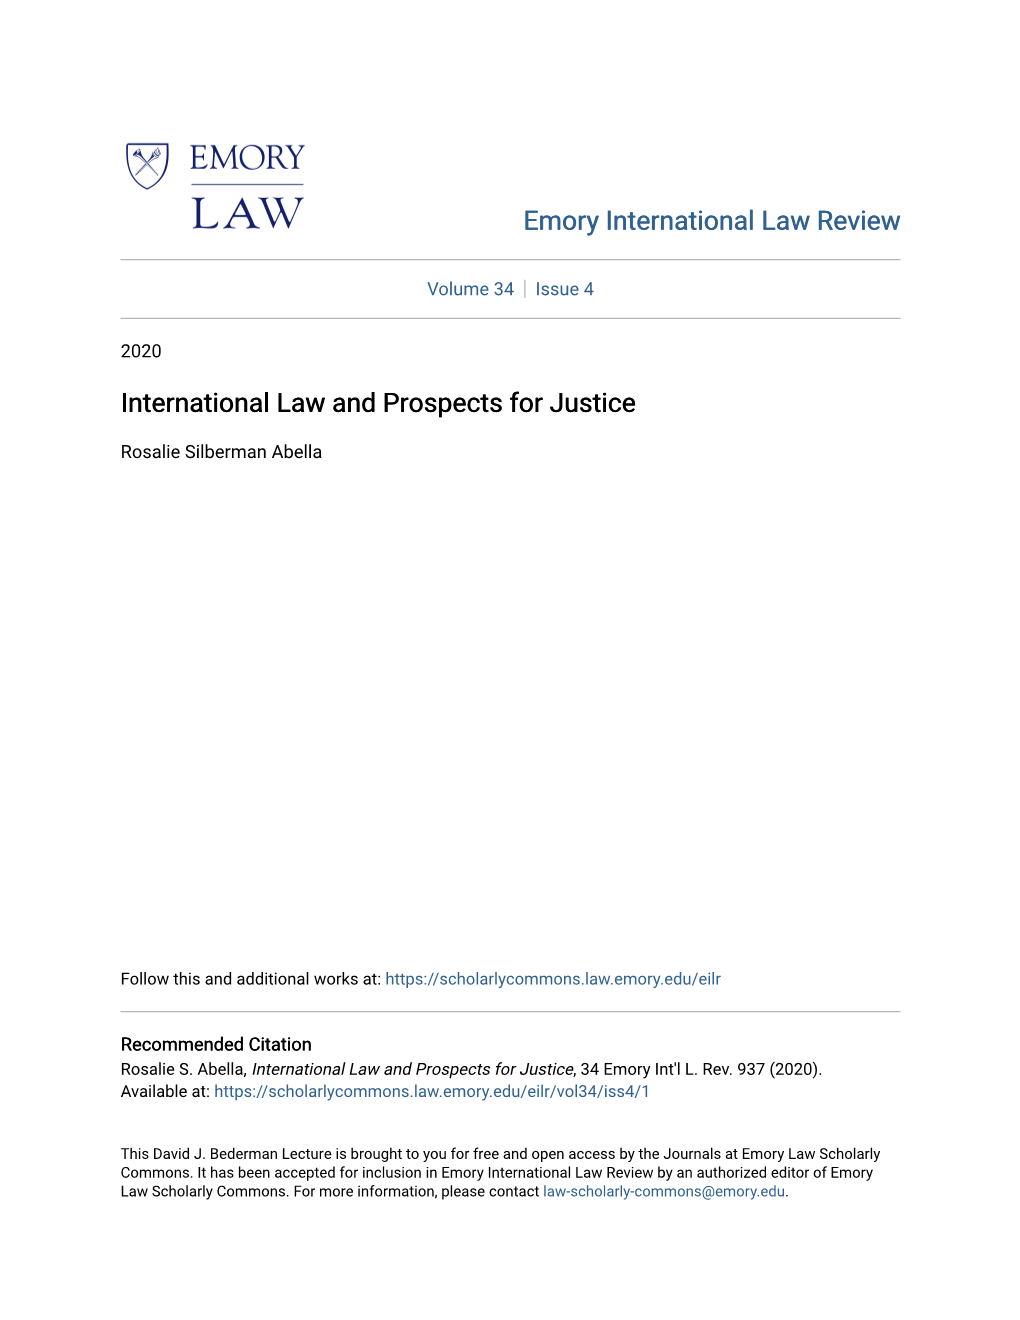 International Law and Prospects for Justice